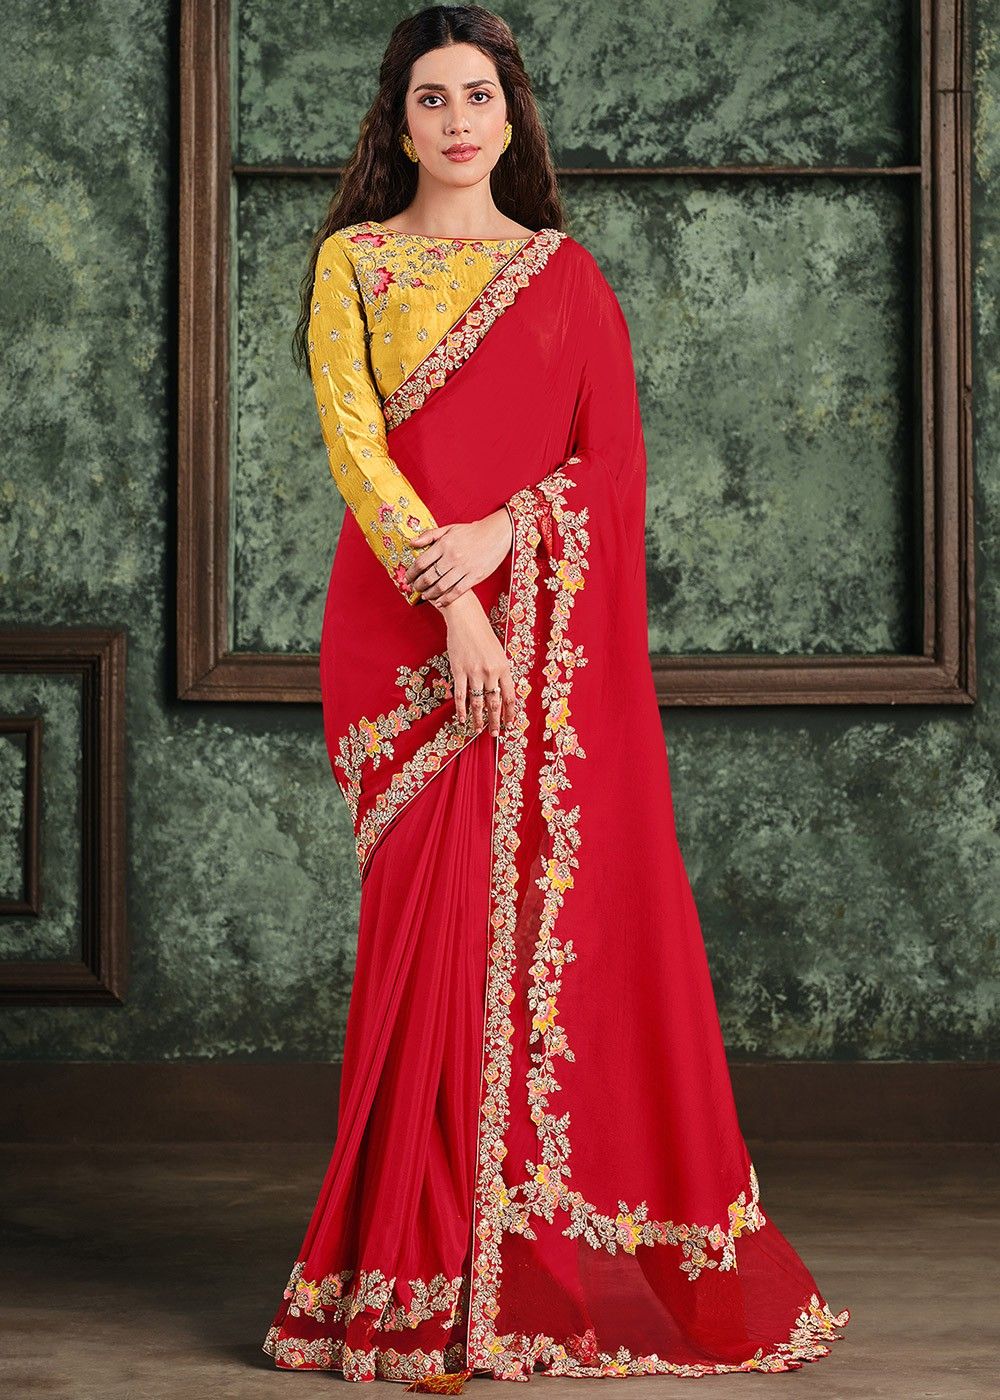 Red Heavy Border Satin Saree With Blouse 4424SR07